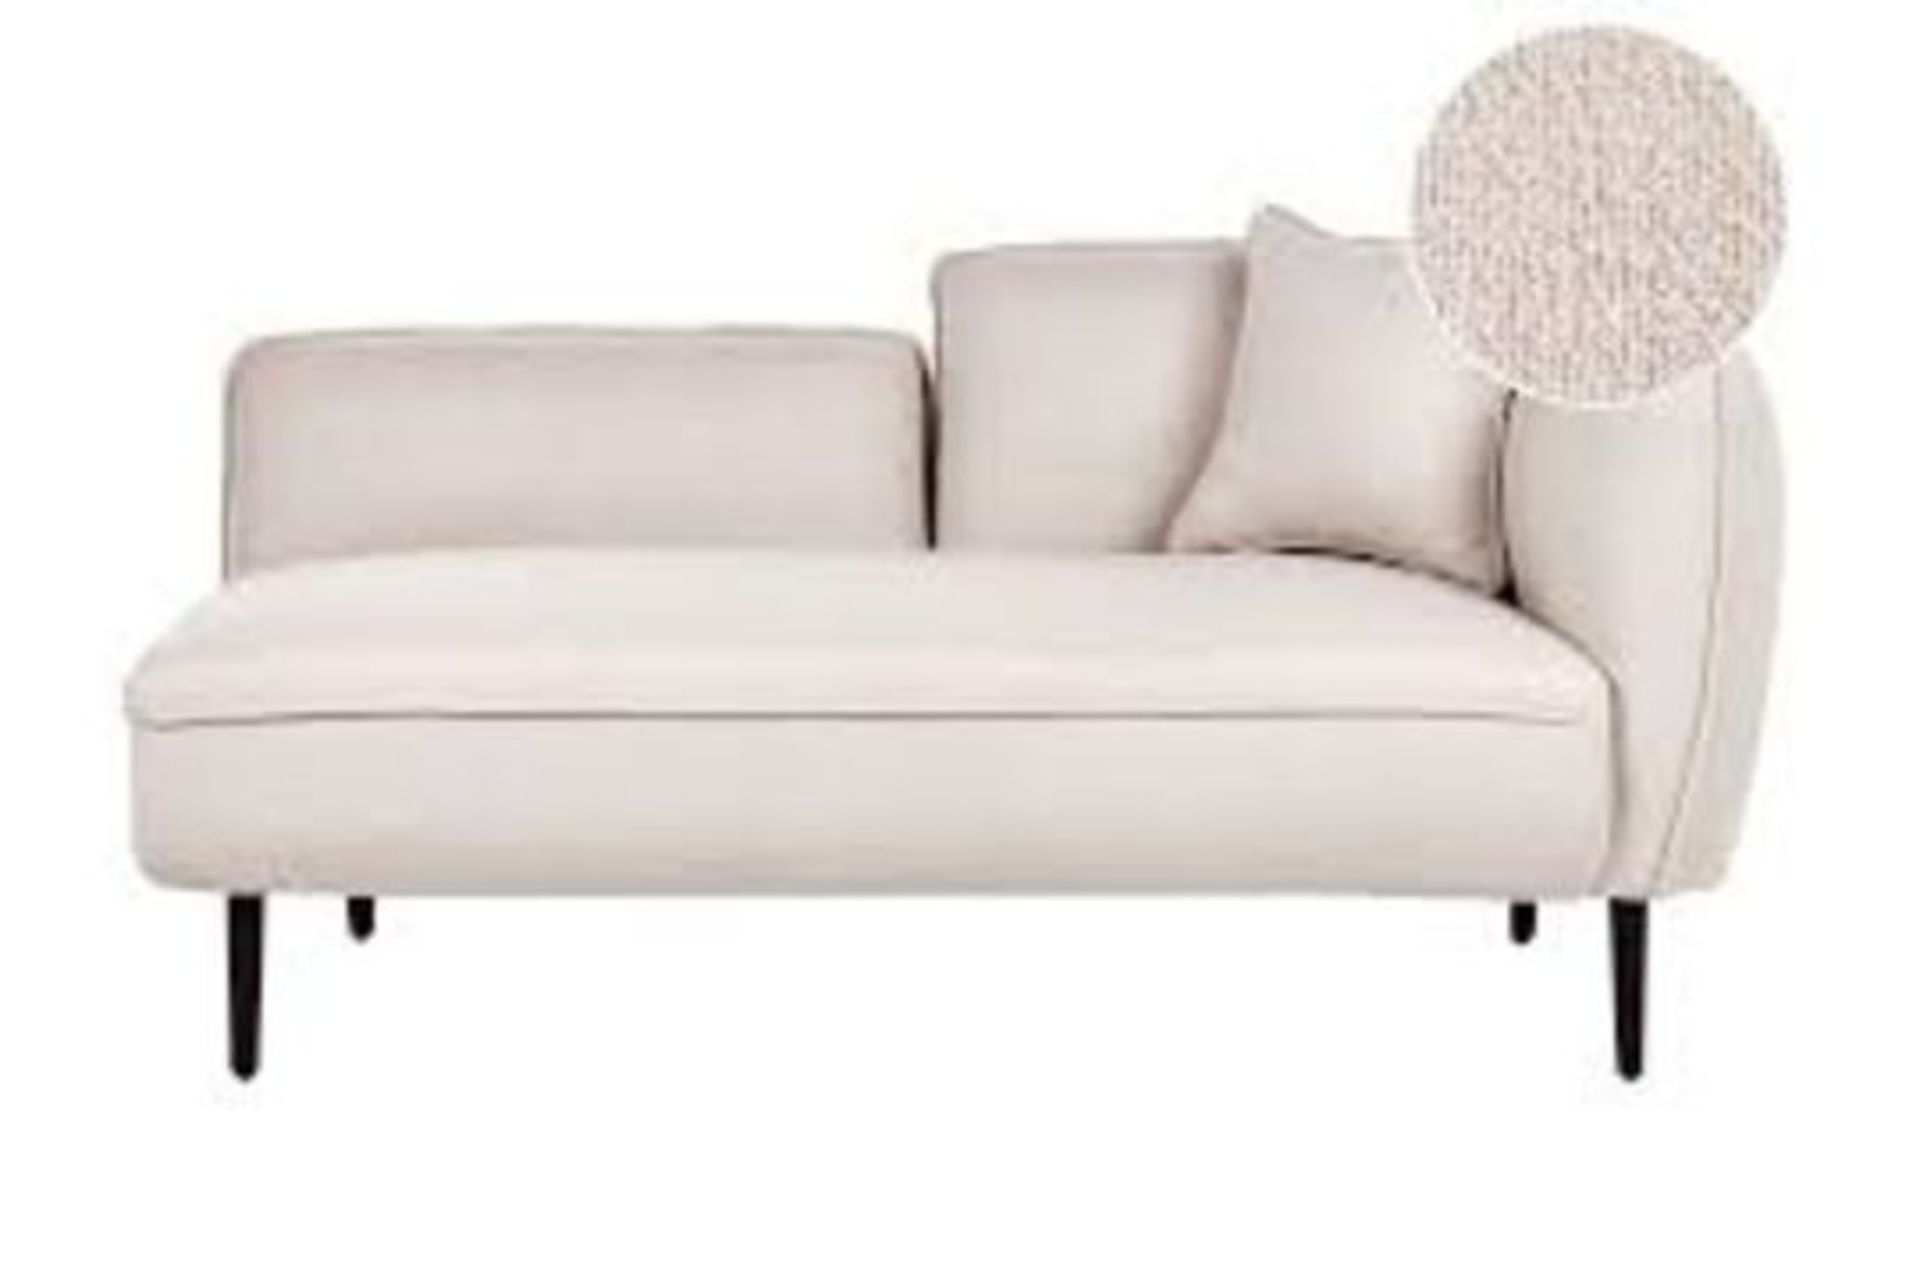 Right Hand Boucle Chaise Lounge Light Beige CHEVANNES RRP £990 - ER23